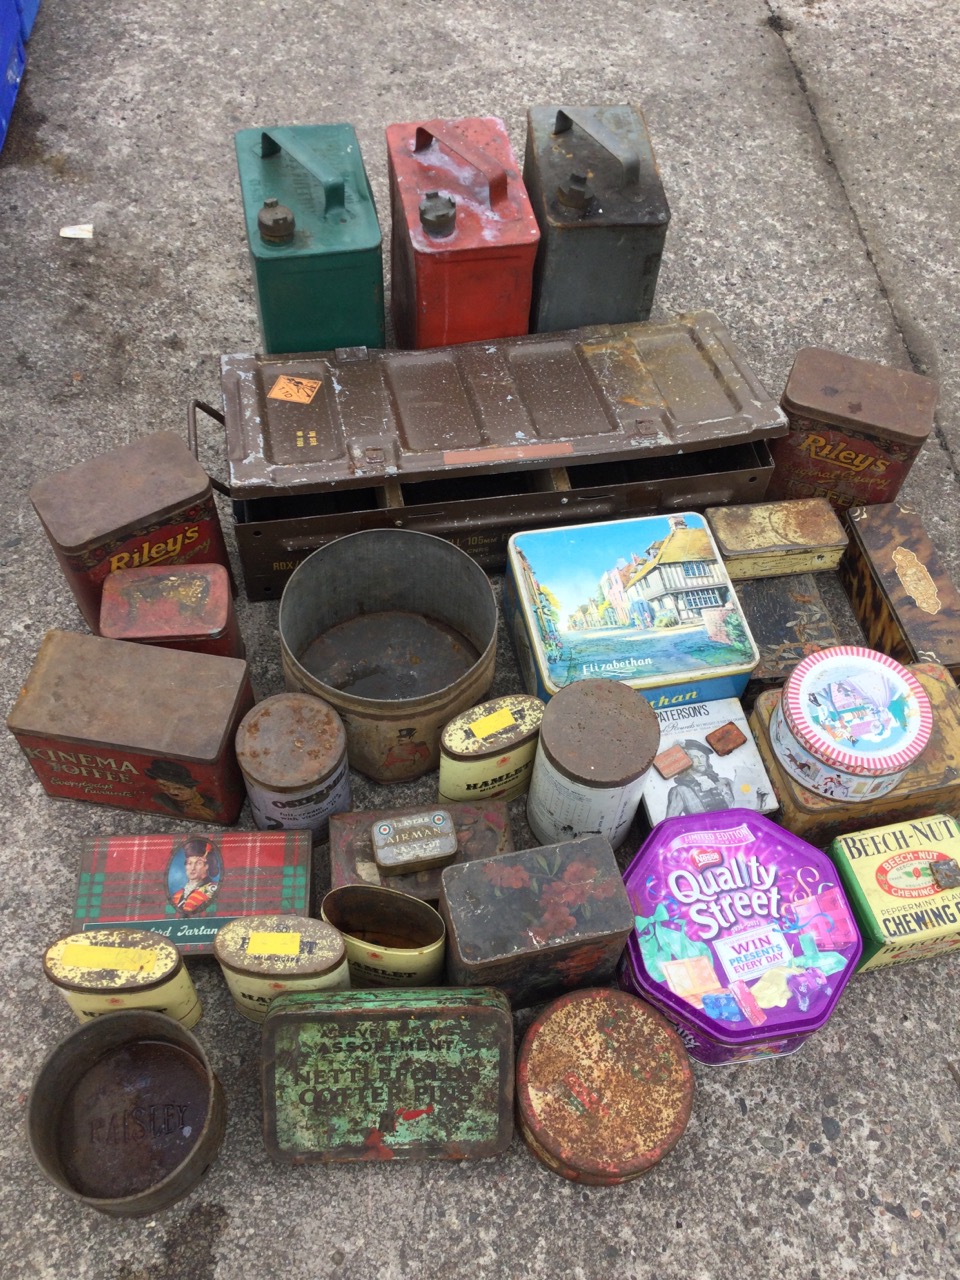 Miscellaneous tins including three shell oil cans, biscuit tins, an ammunition box, toffee tins,